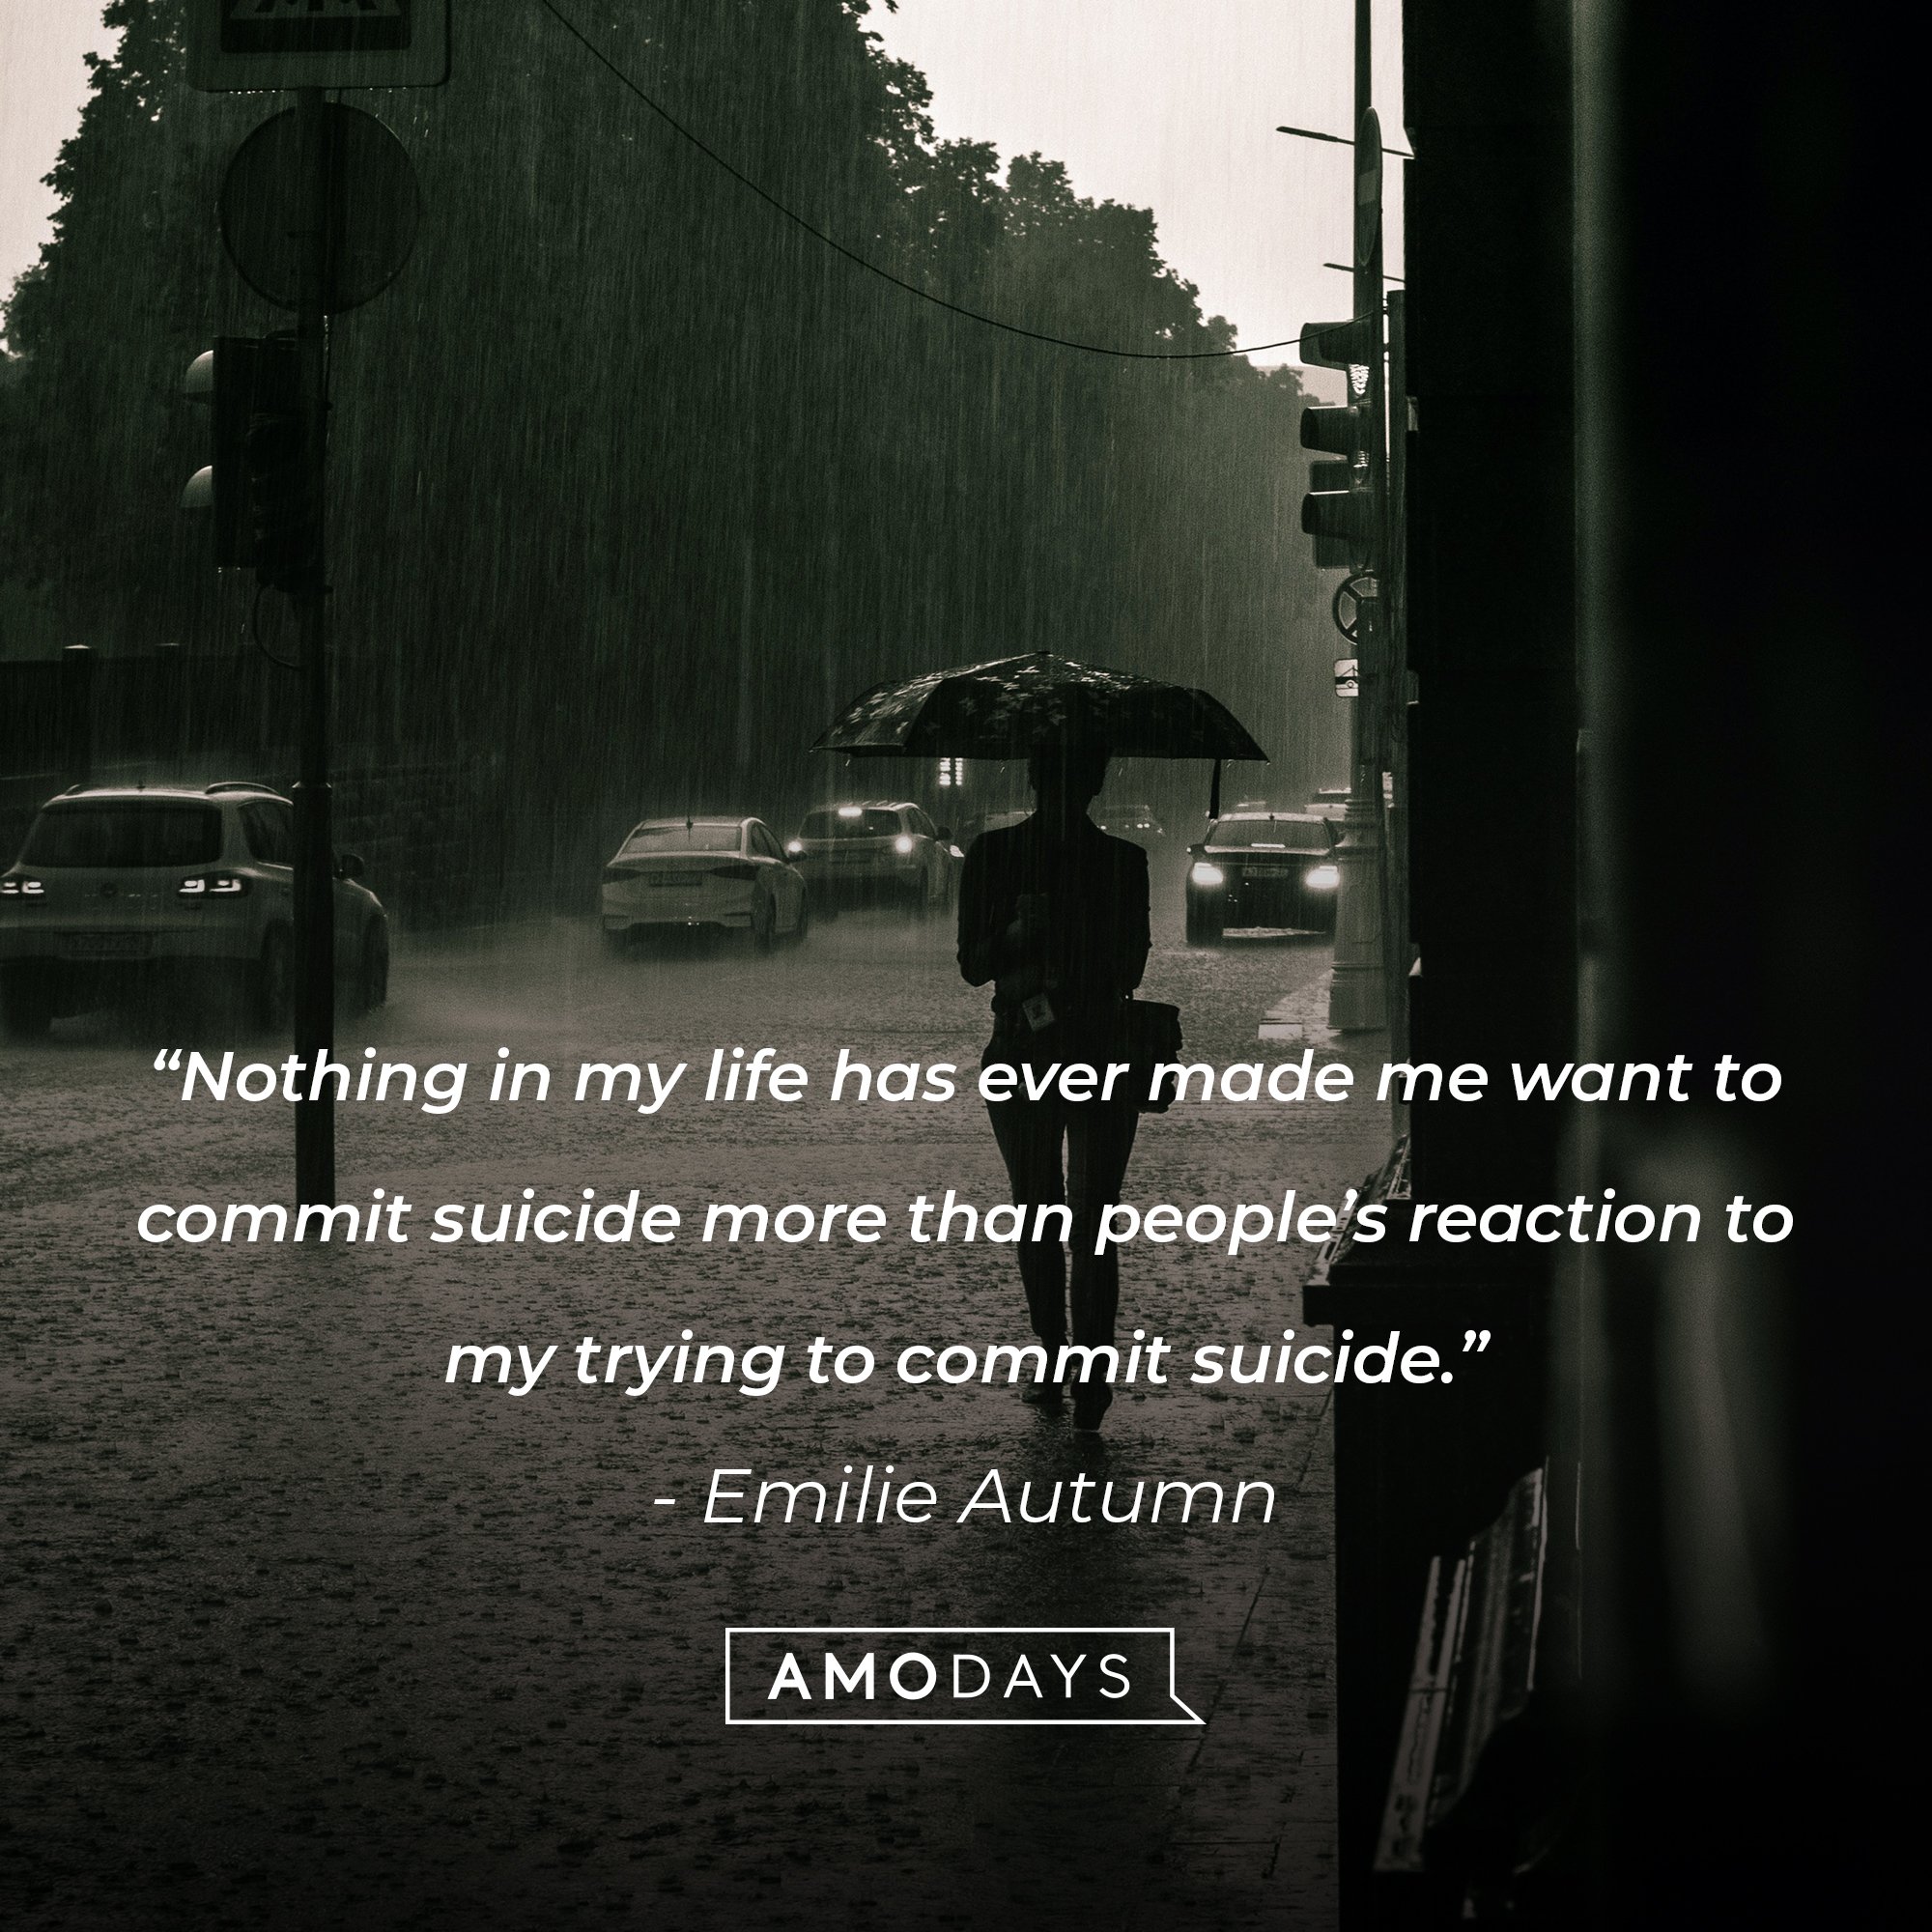 Emilie Autumn's quote: “Nothing in my life has ever made me want to commit suicide more than people’s reaction to my trying to commit suicide.” | Image: AmoDays